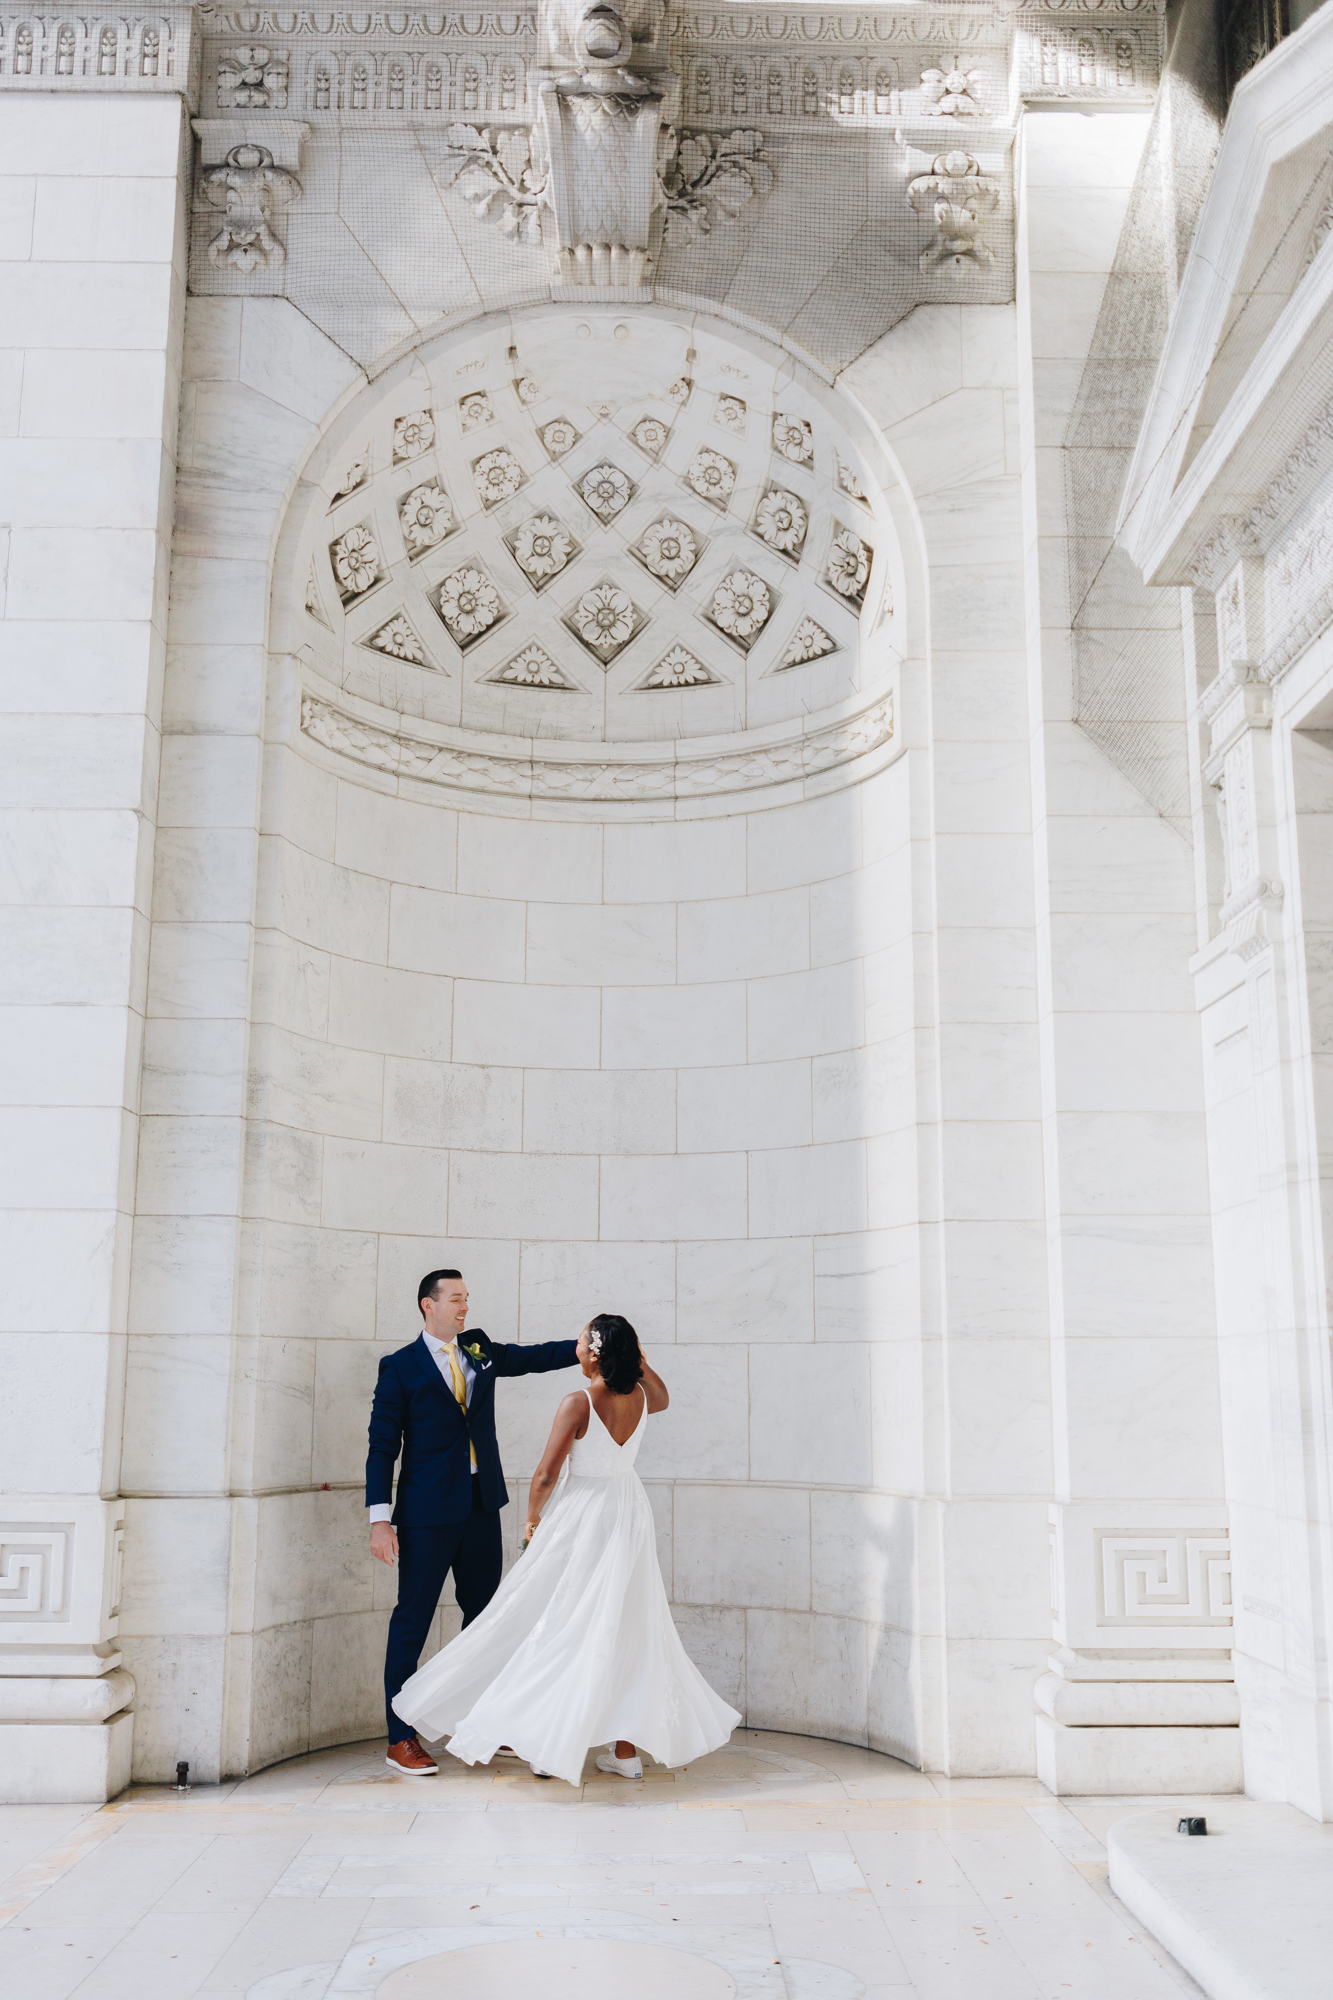 How to hire a New York wedding photographer